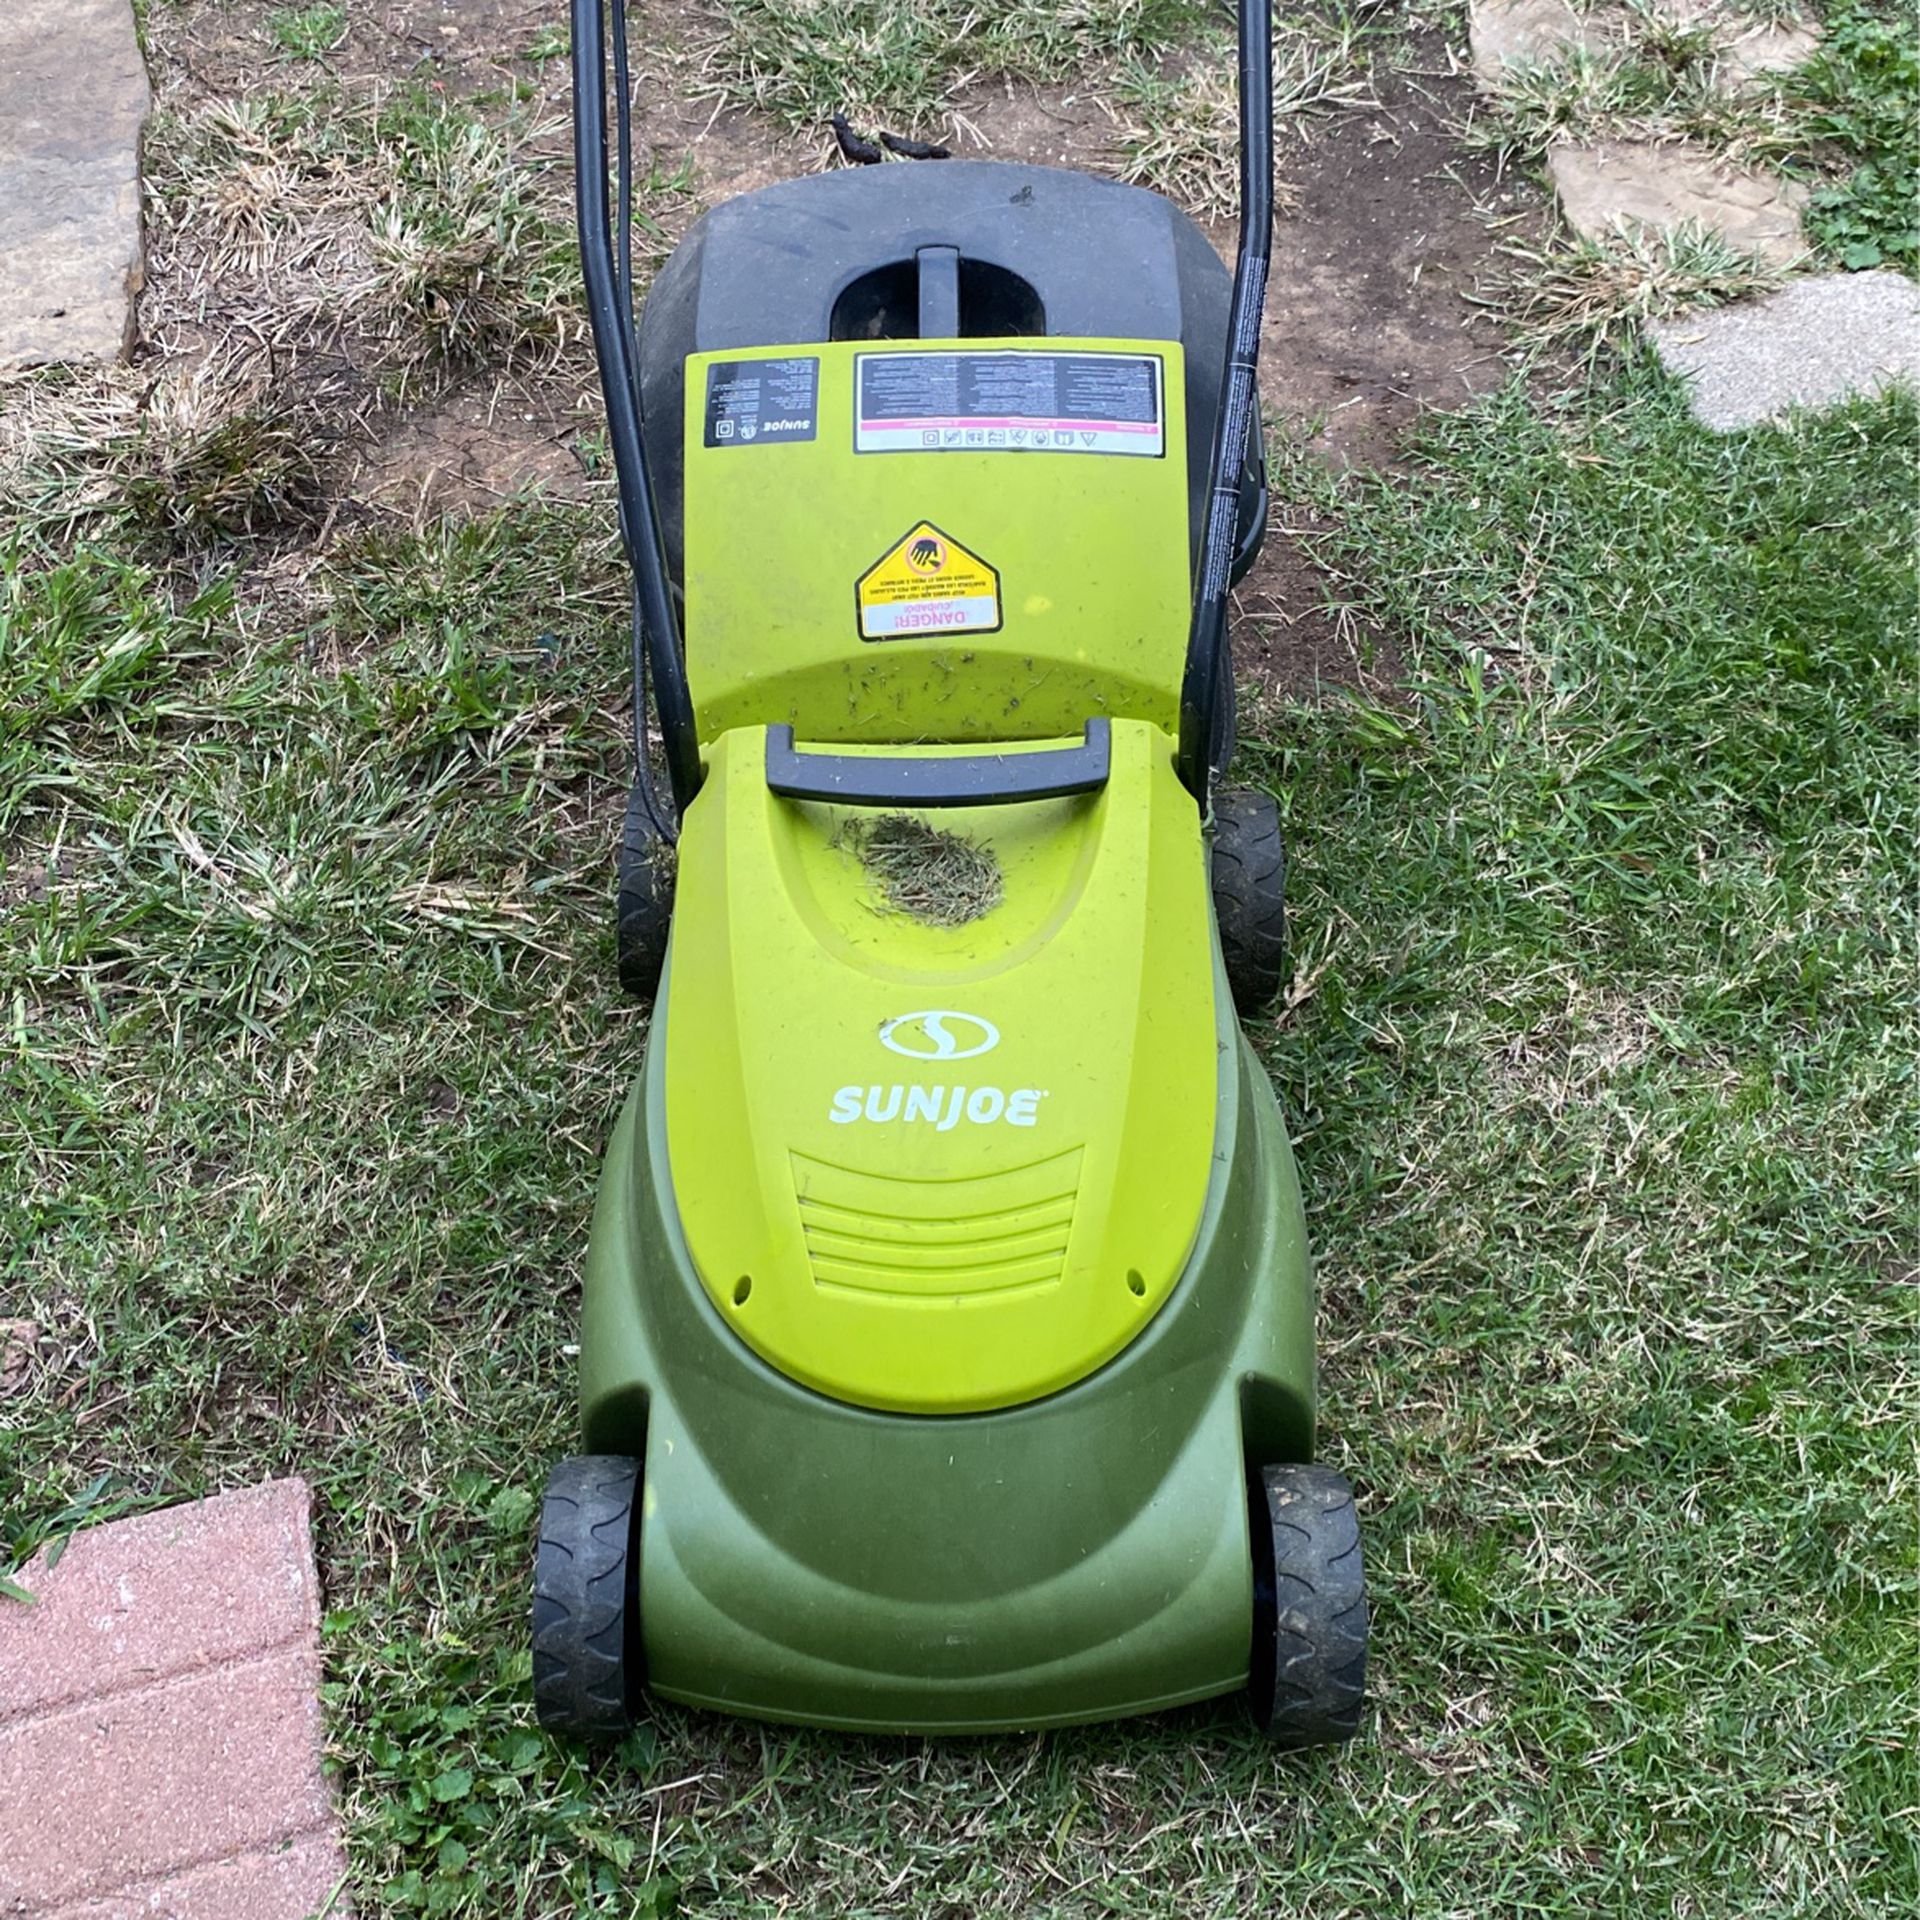 Electric Lawn Mower And Weed Eater 